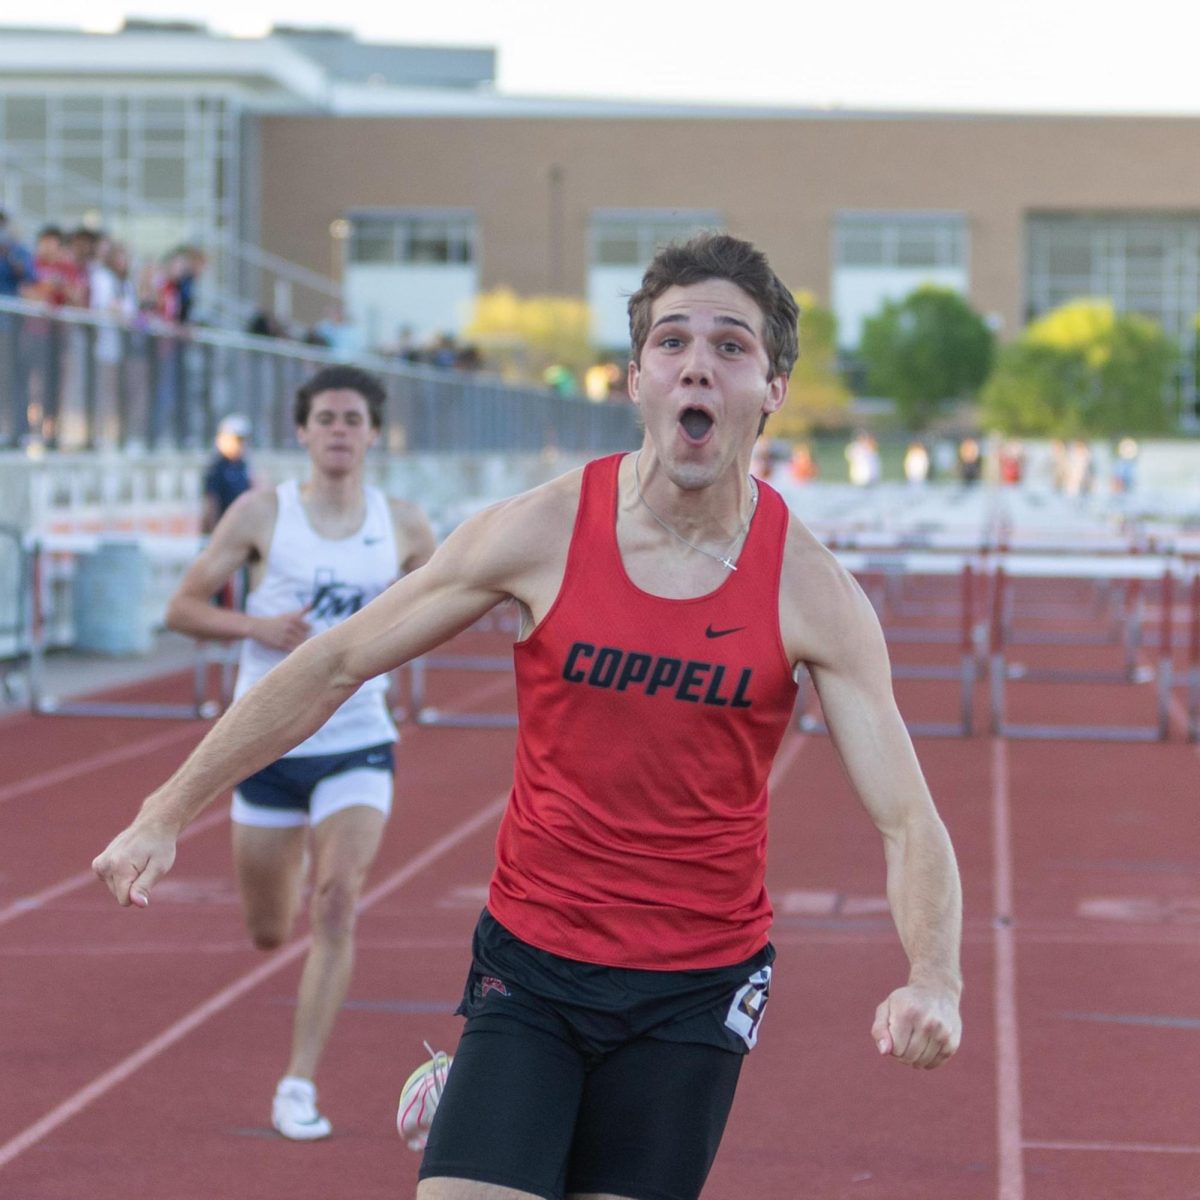 Senior Aidan McFarlane will attend Stanford University in the fall to run track at the collegiate level. McFarlane has been running track since seventh grade at Coppell Middle School North. Senior Aidan McFarlane will attend Stanford University in the fall to run track at the collegiate level. McFarlane has been running track since seventh grade at Coppell Middle School North. Photo courtesy Eric Hill